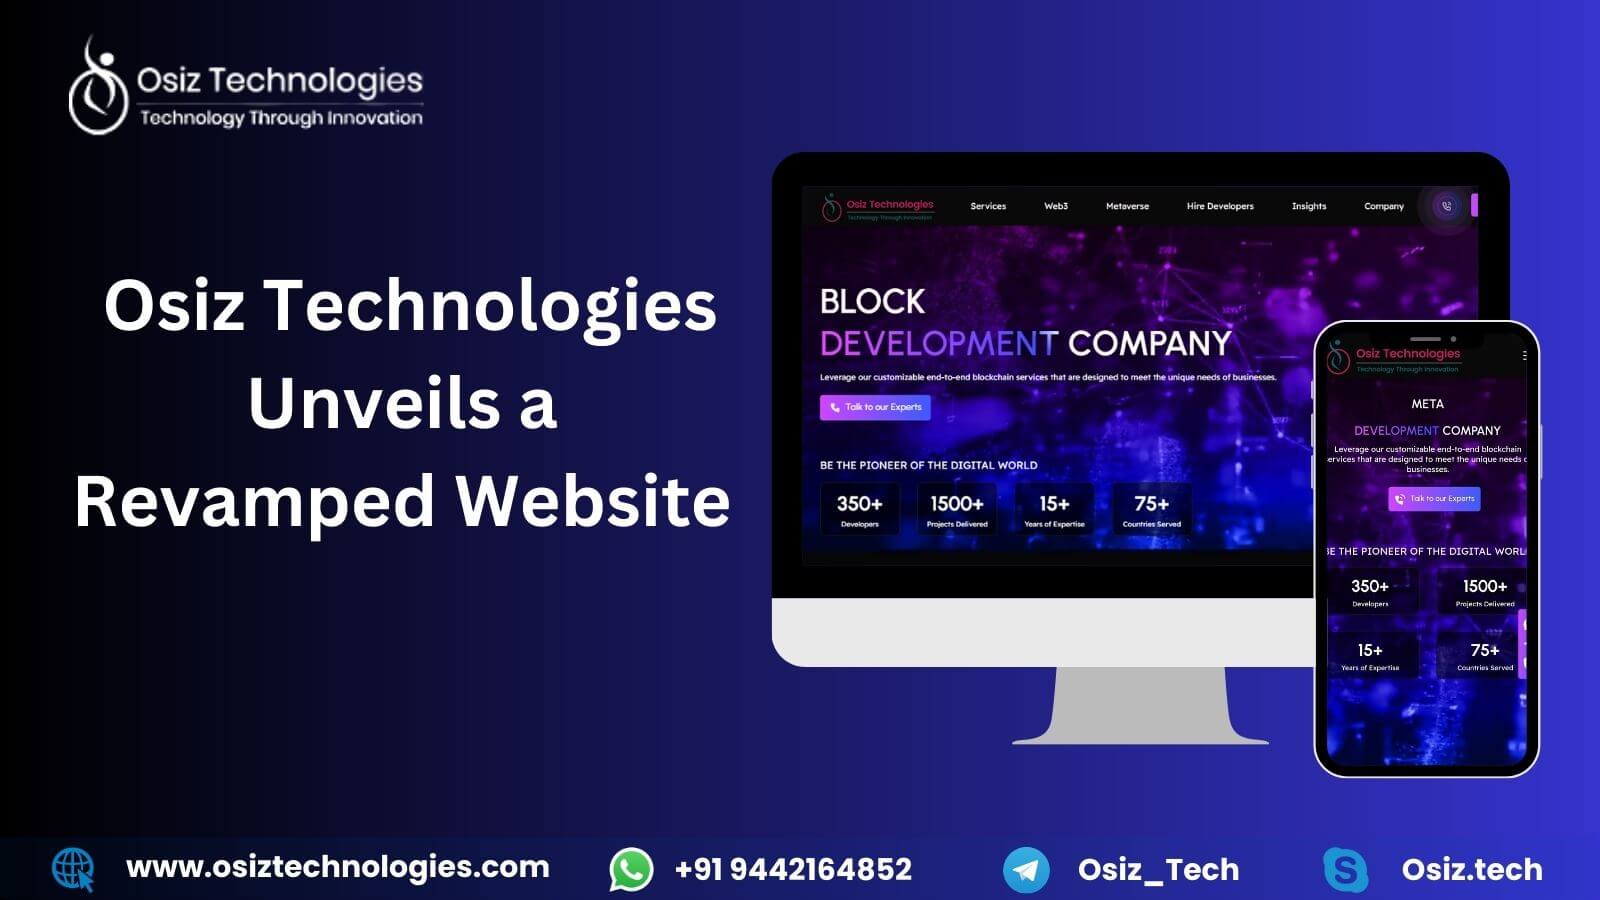 Experience the Next-Gen Digital Landscape: Osiz Technologies Unveils a Revamped Website Packed with Exciting New Services.